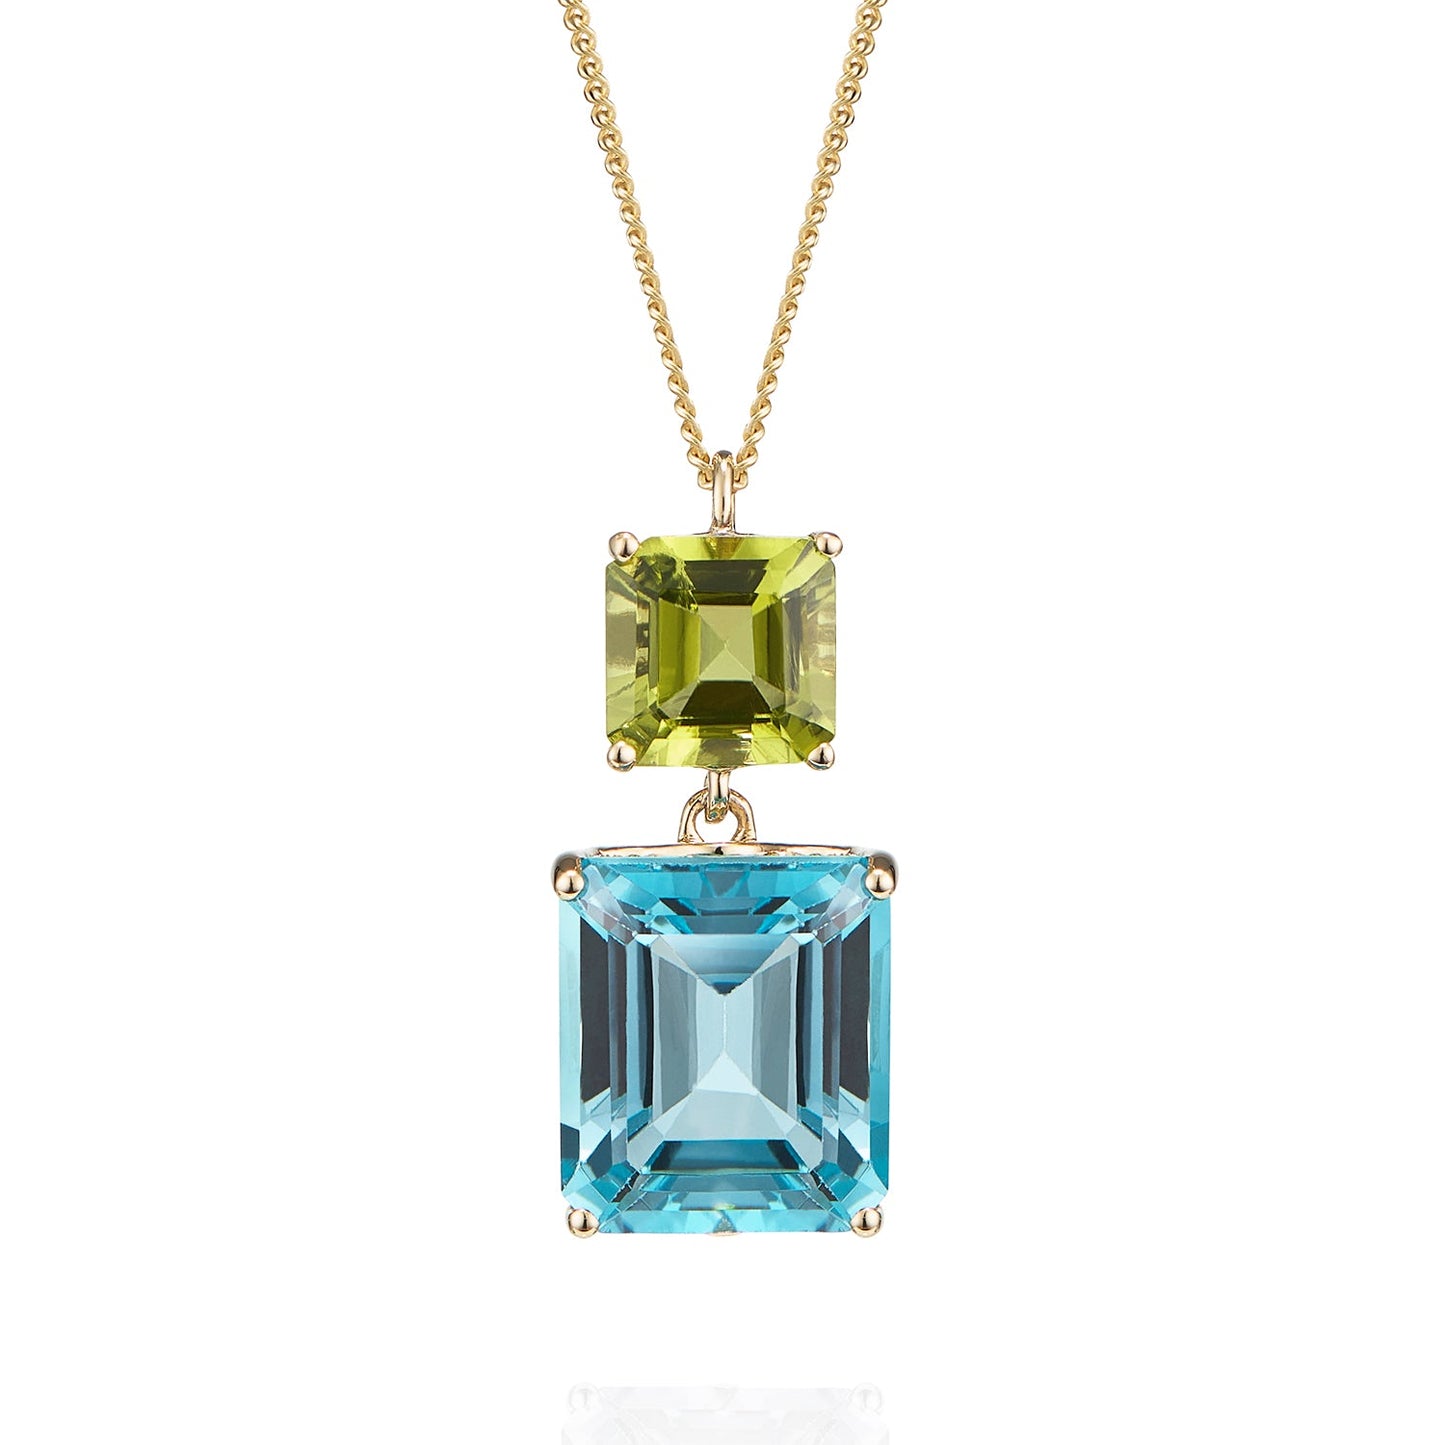 Octagon Gold Necklace in Peridot & Blue Topaz